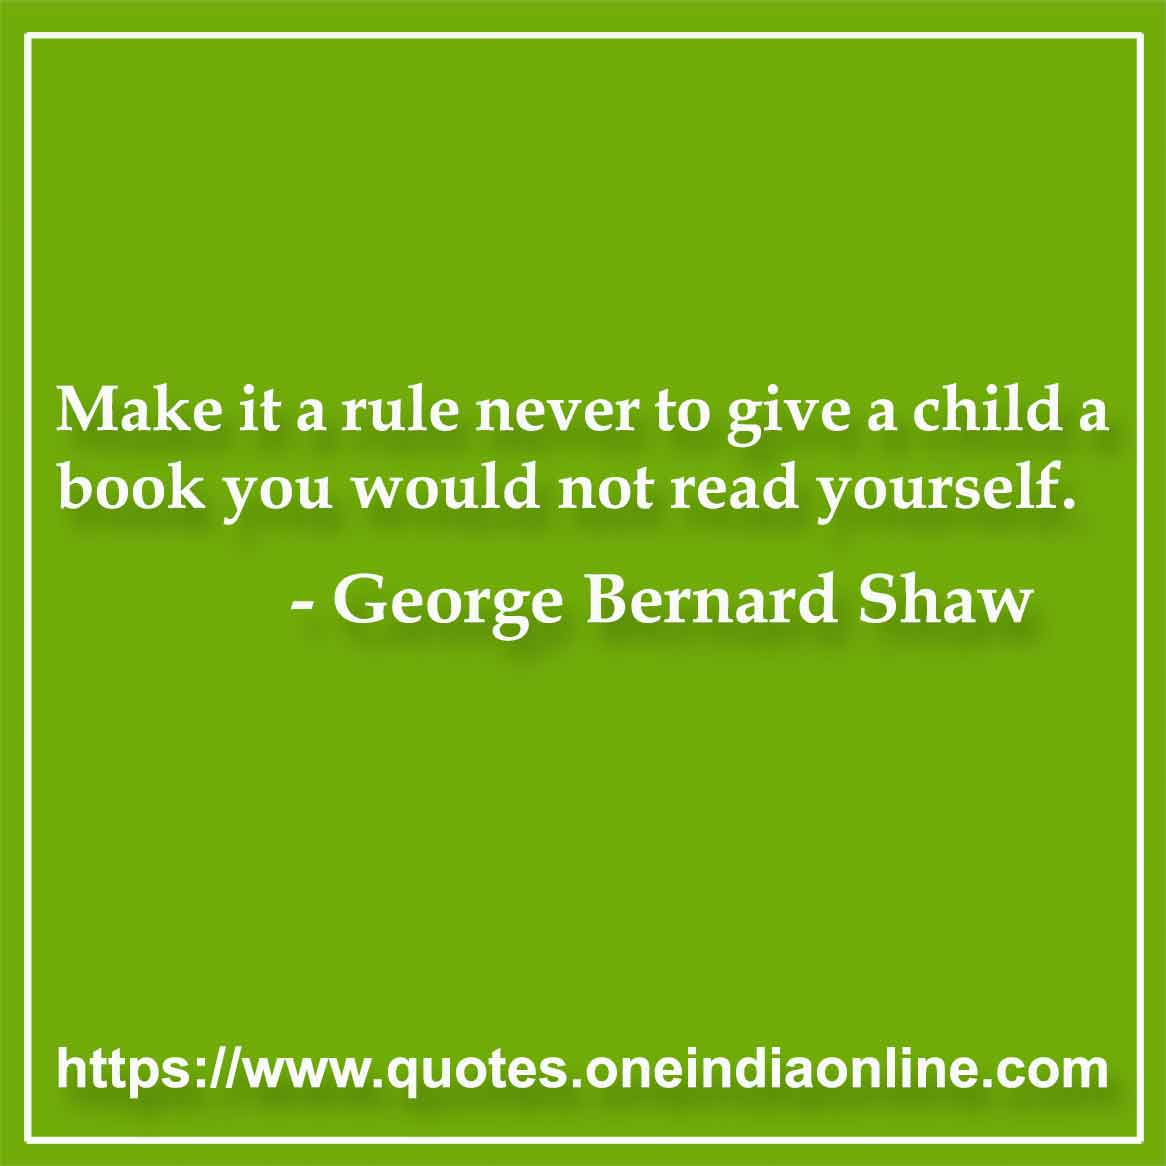 George Bernard Shaw Quotes in English Quotation and Sayings